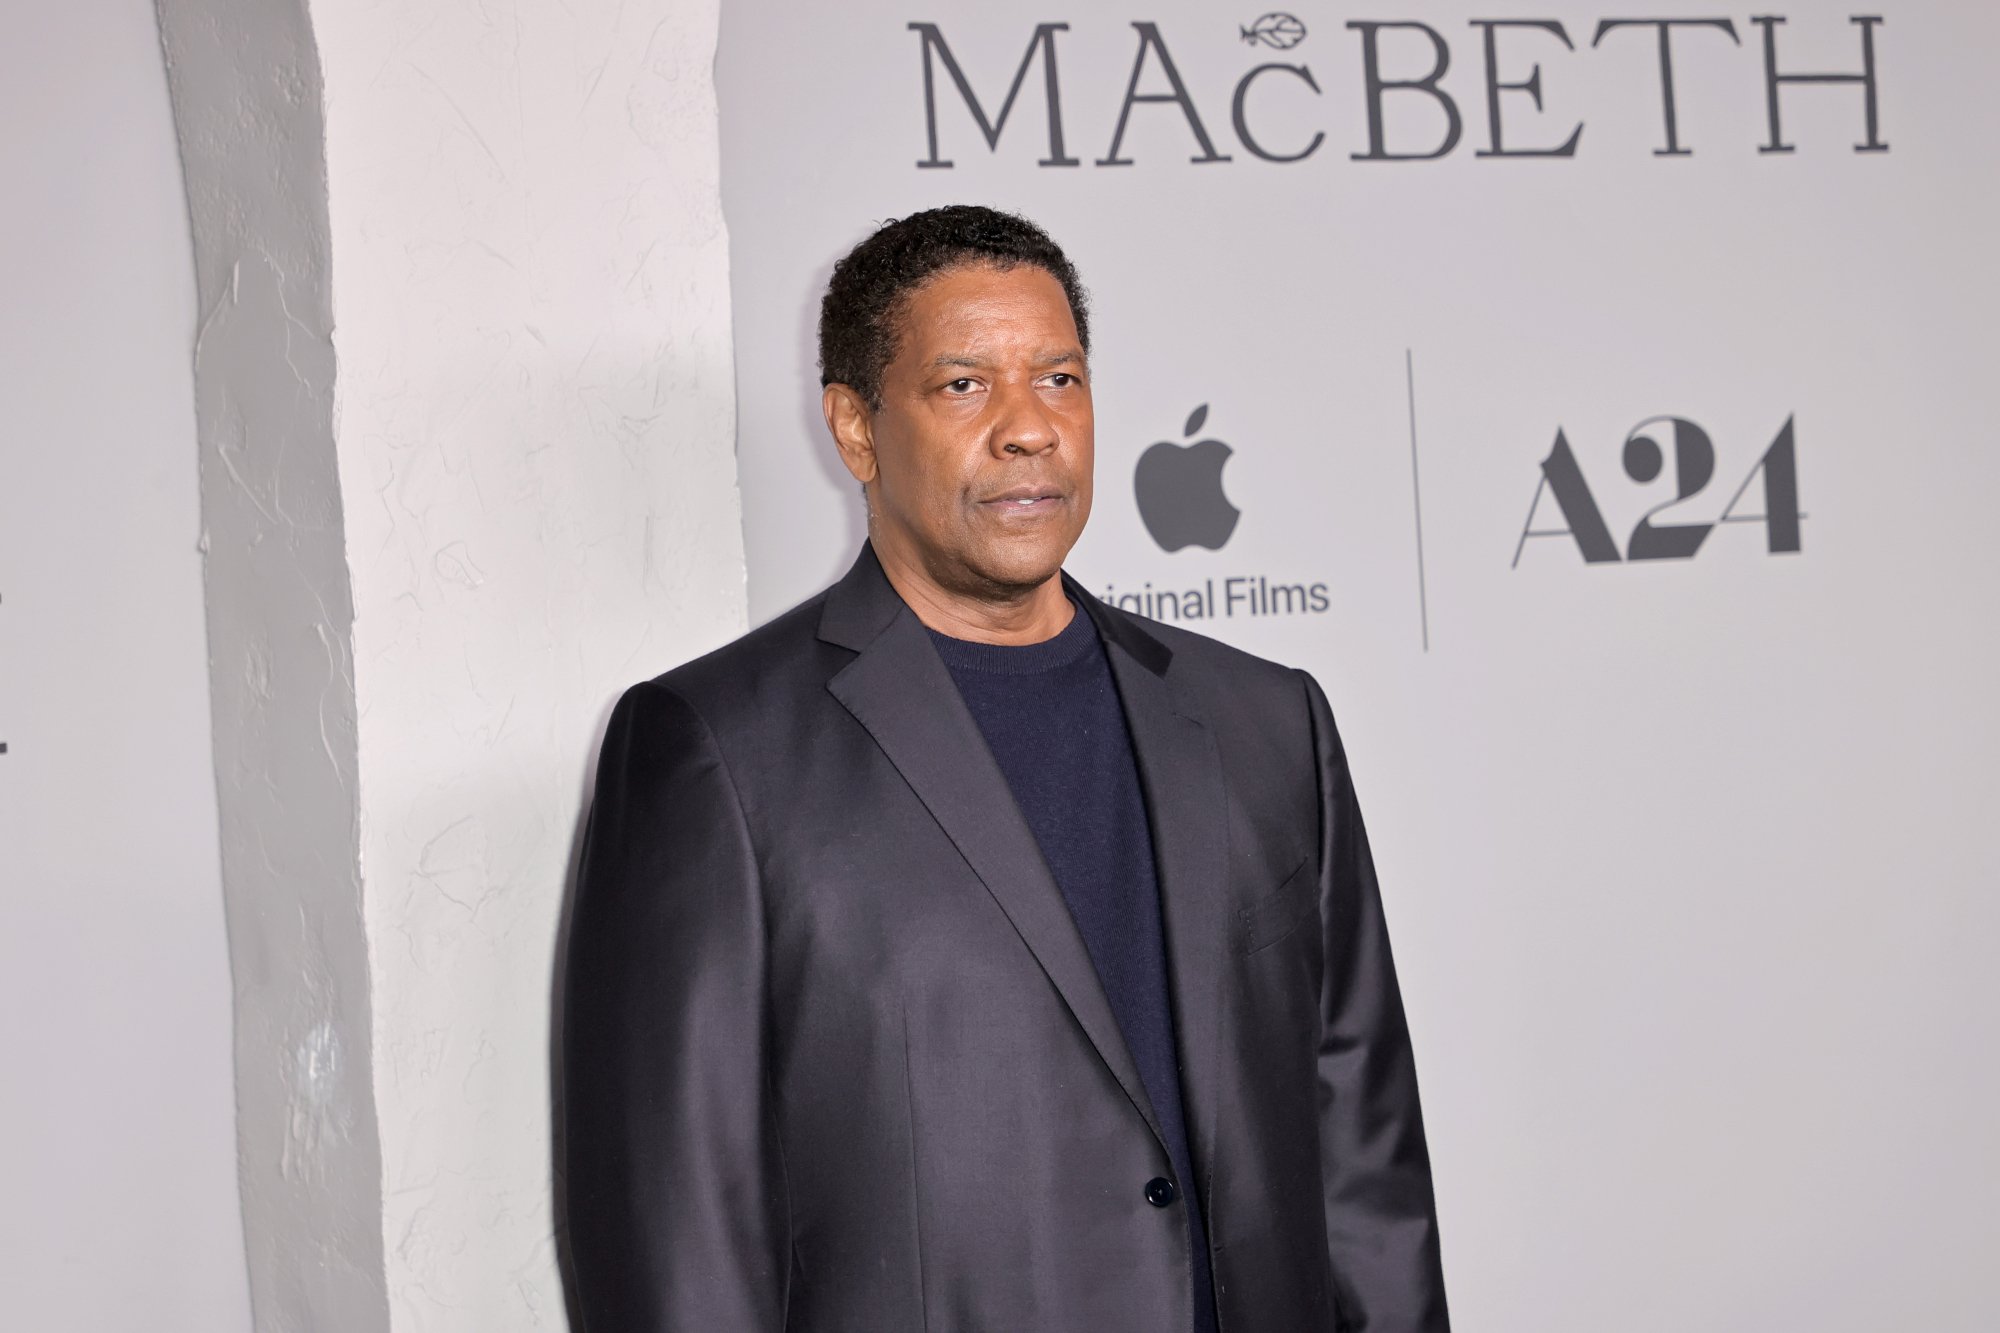 'The Tragedy of Macbeth' actor Denzel Washington standing in front of white step and repeat